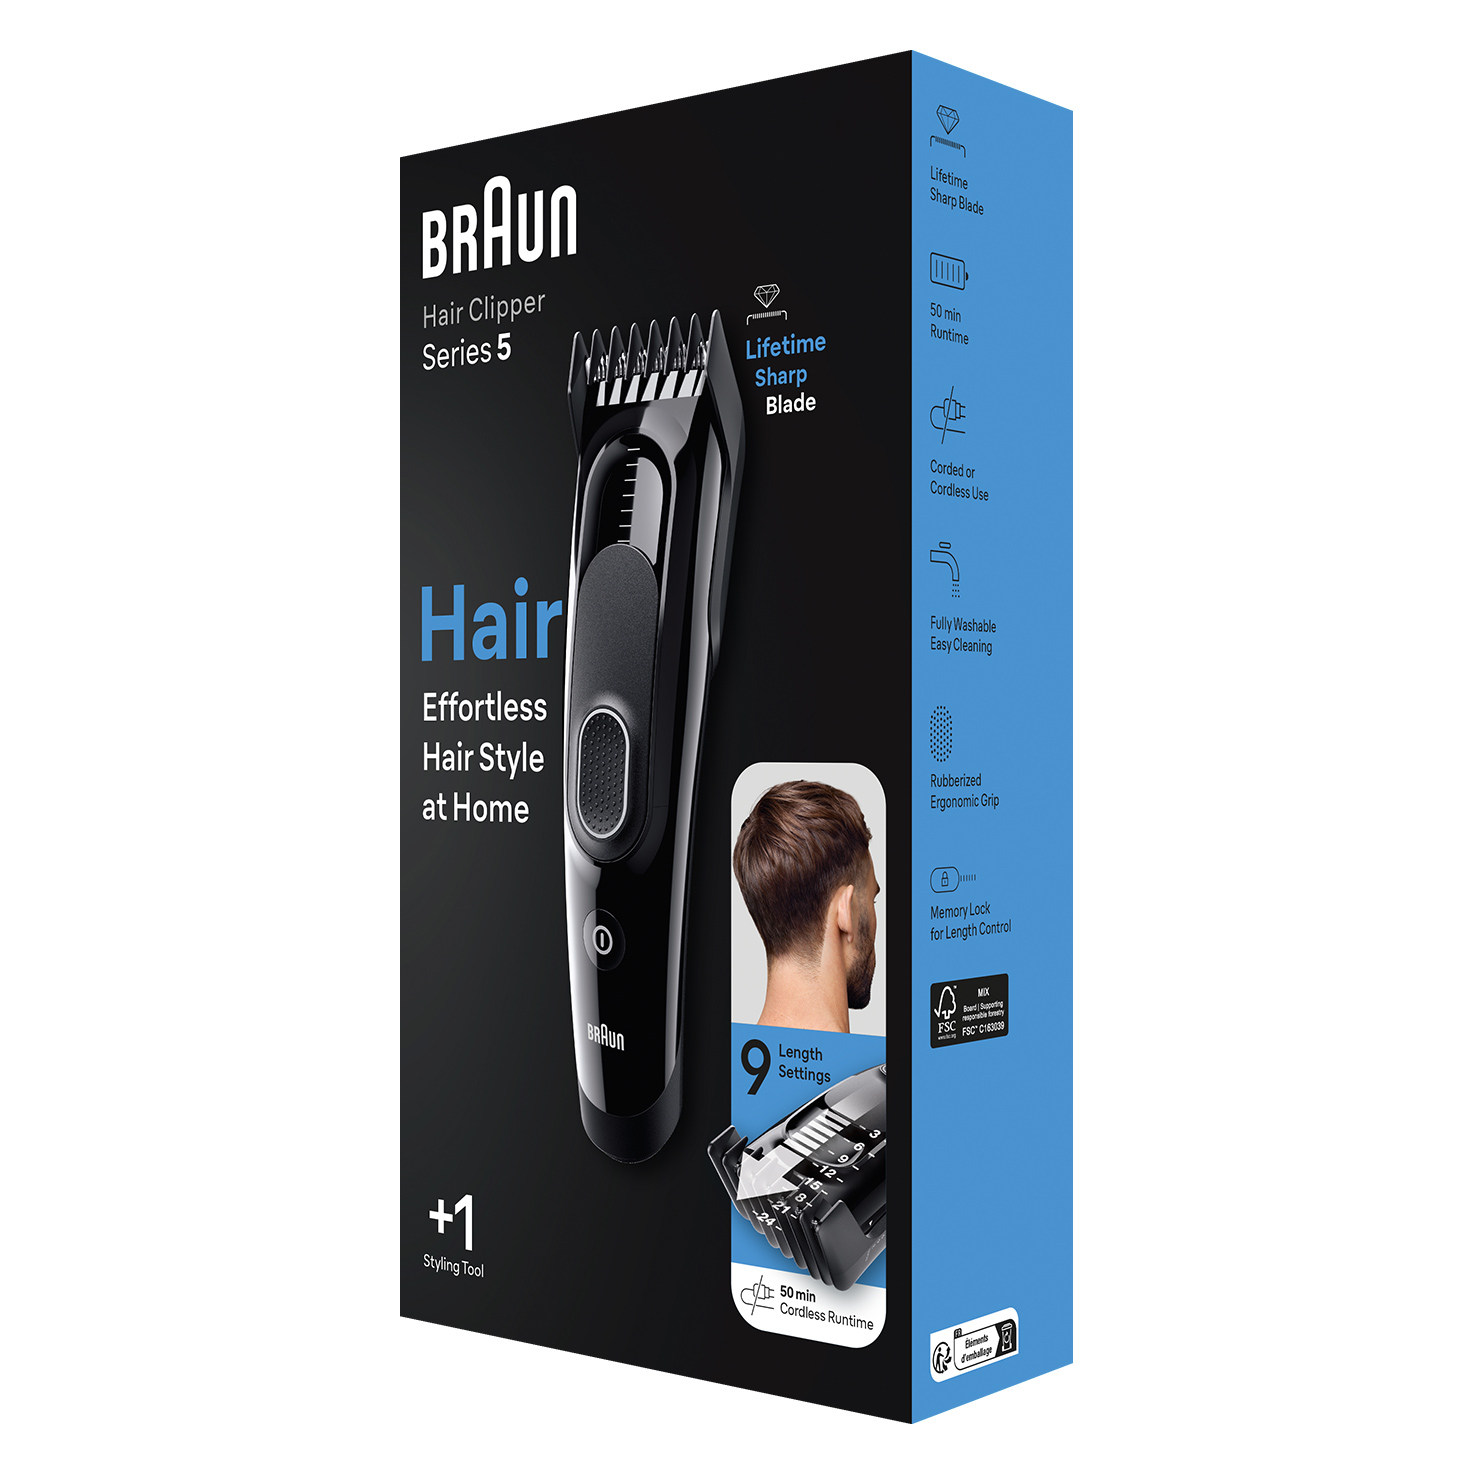 How to use hair clippers to cut your own hair | Braun